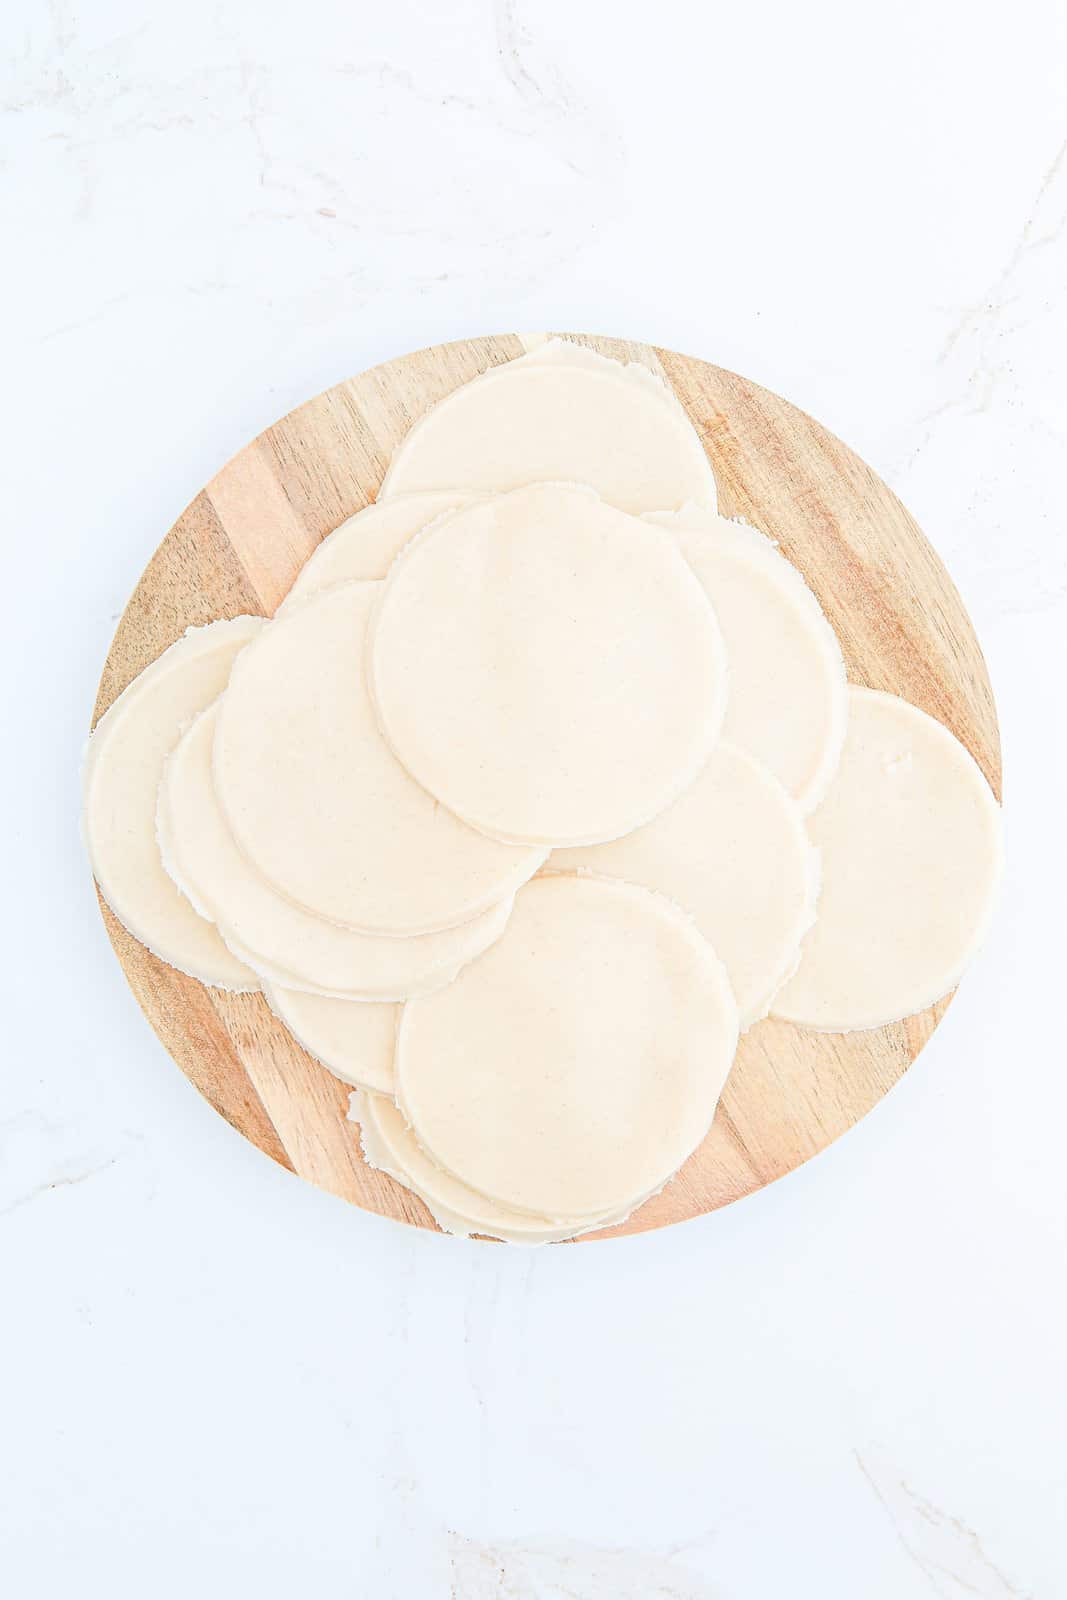 Pie crust cut into circles on wooden board.